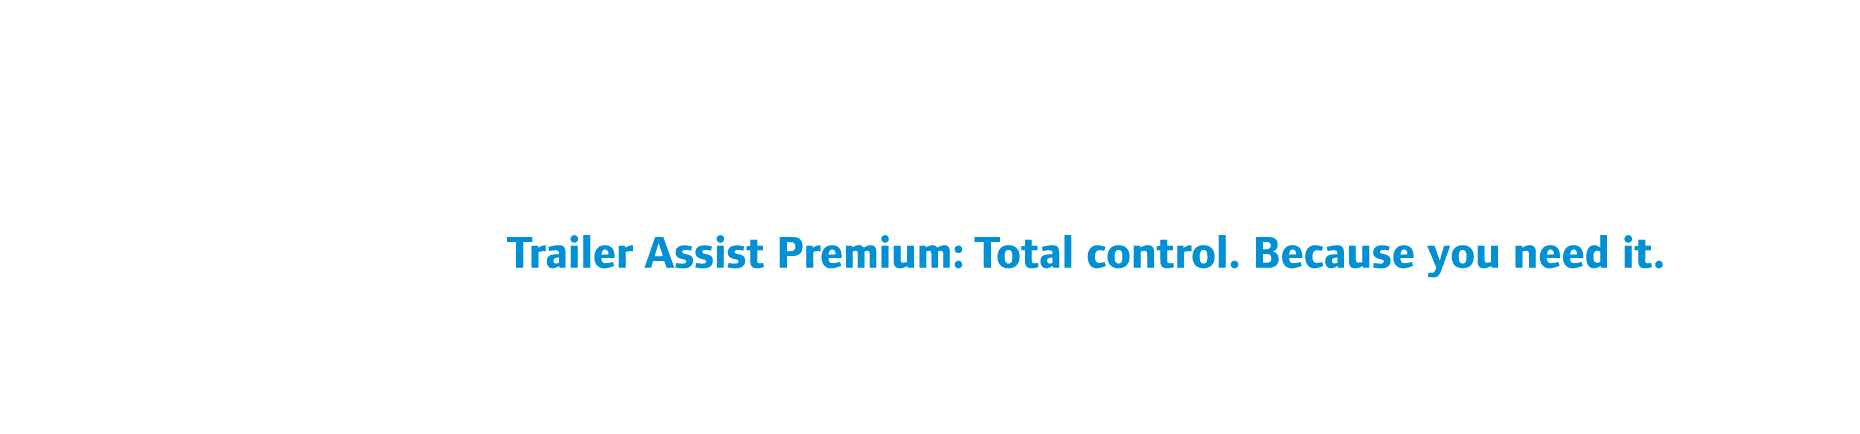 Trailer Assist Premium extends control and visibility of your fleet beyond your refrigeration equipment, giving you n...